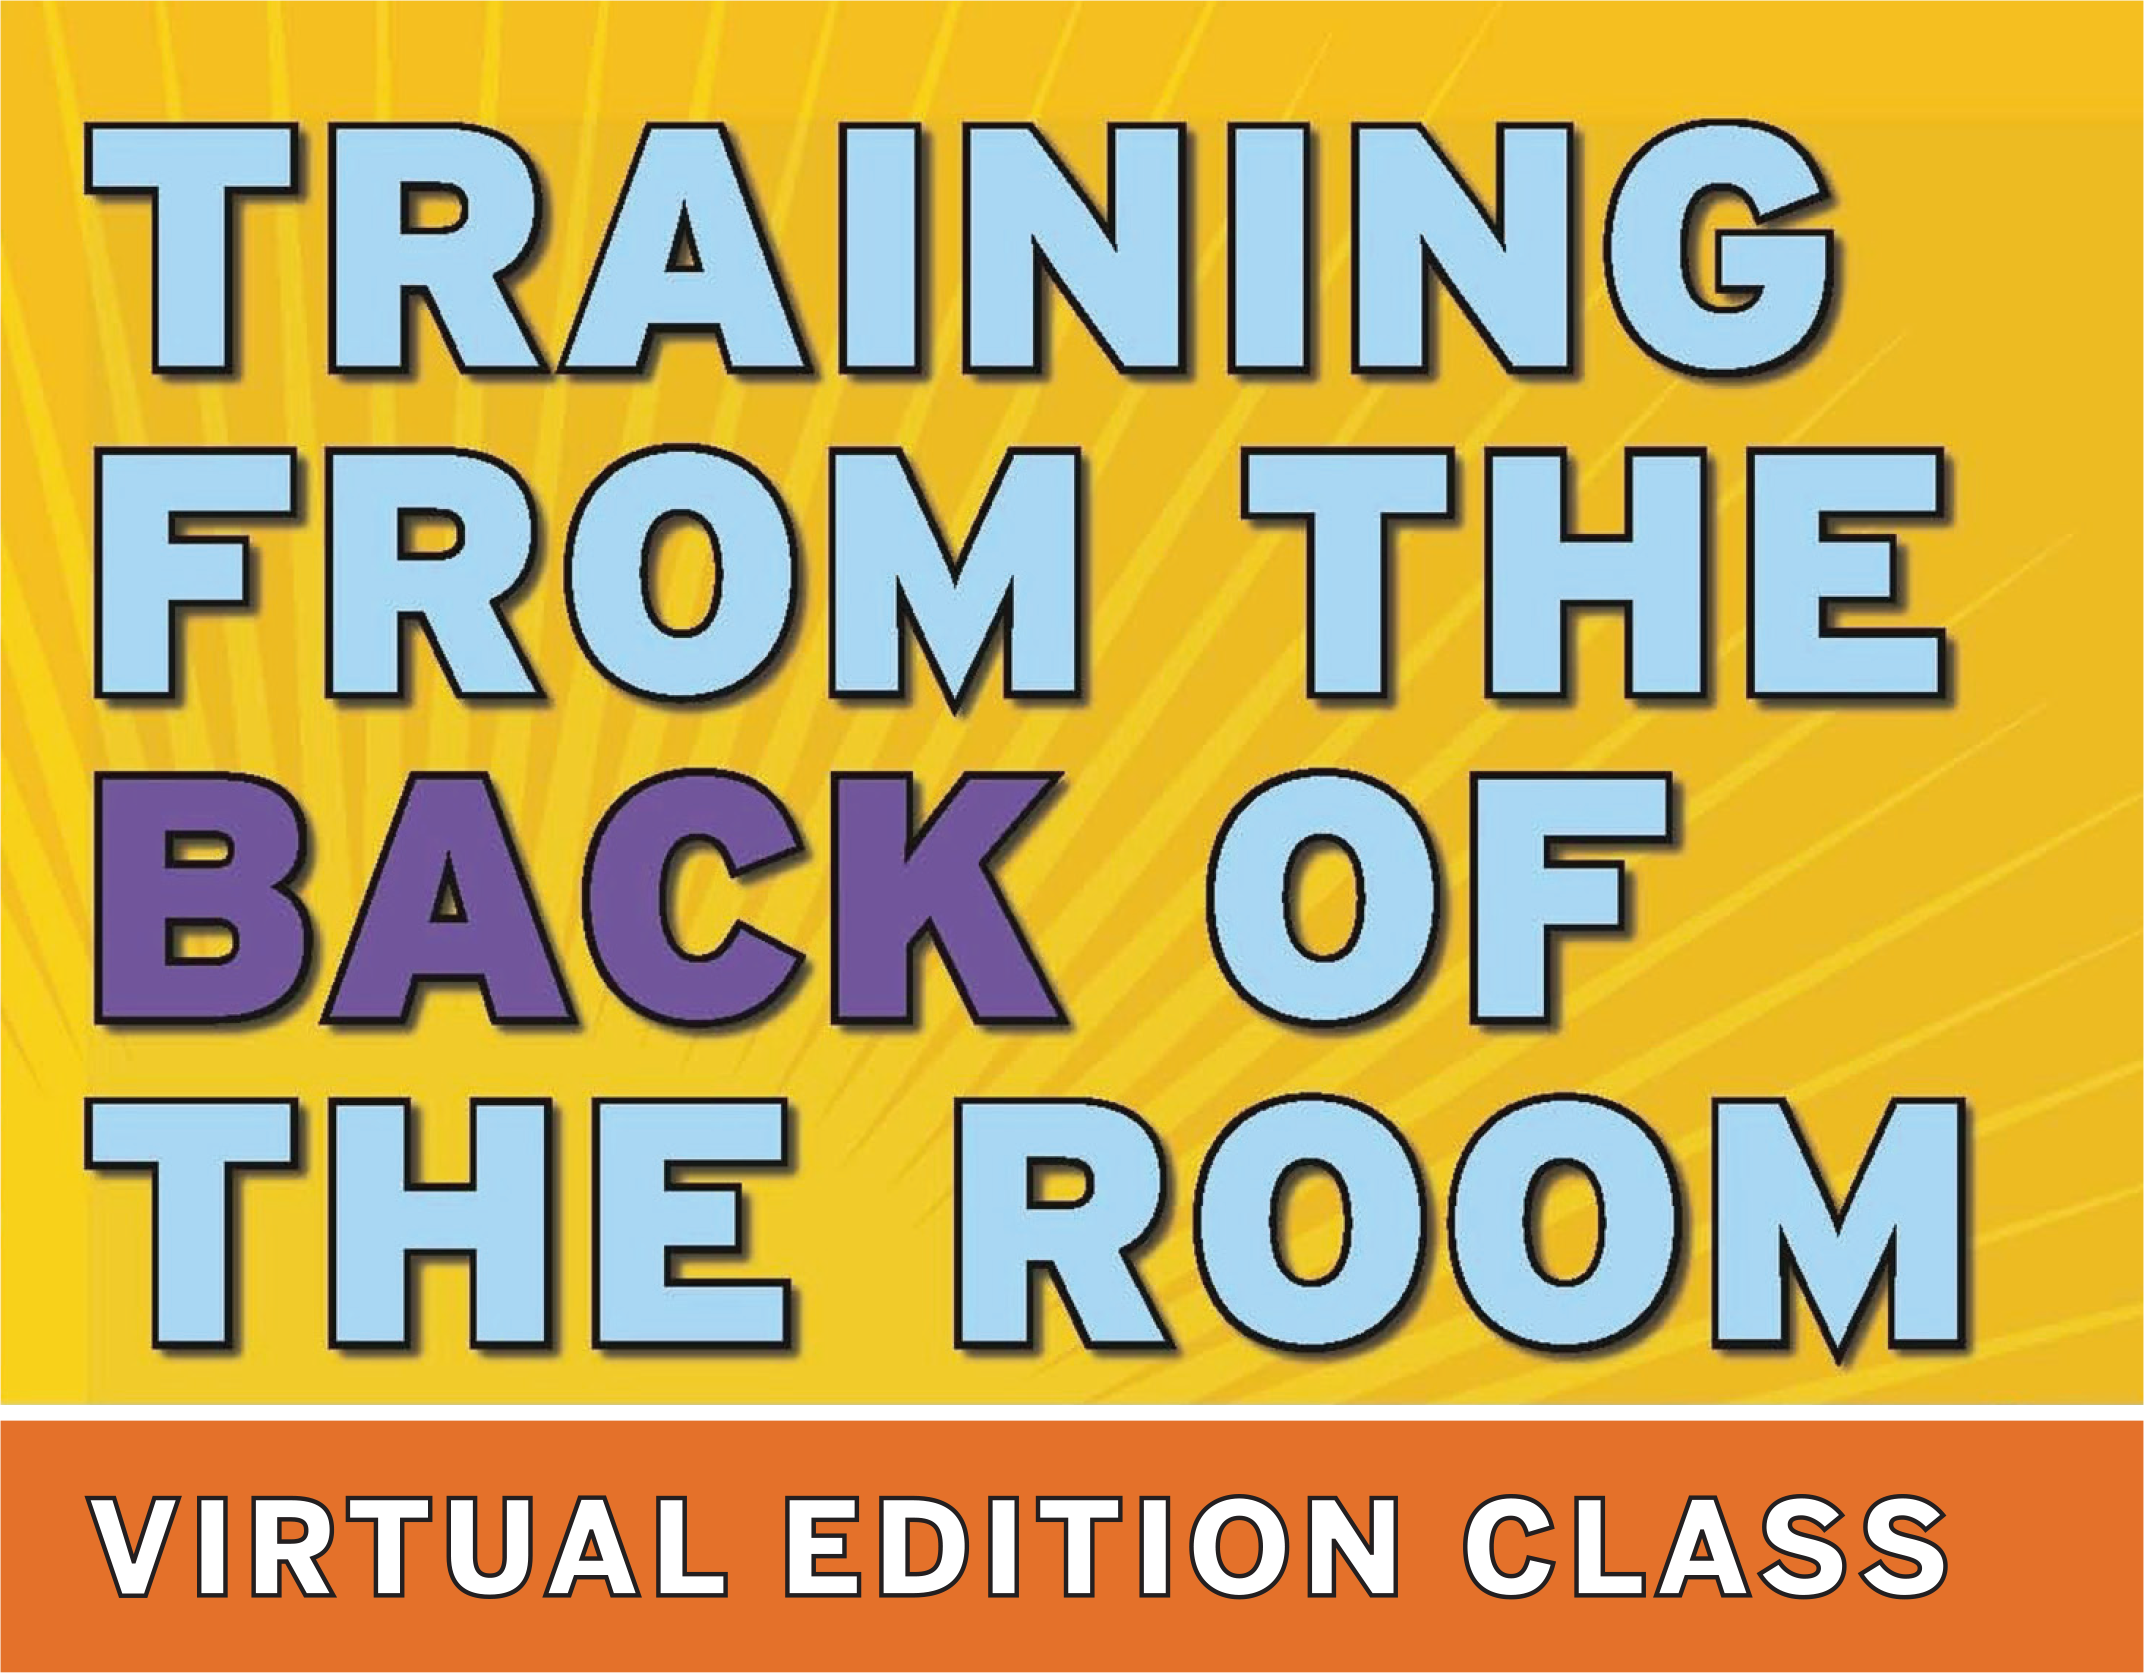 TBR-VE - Training from the Back of the Room Virtual Edition logo